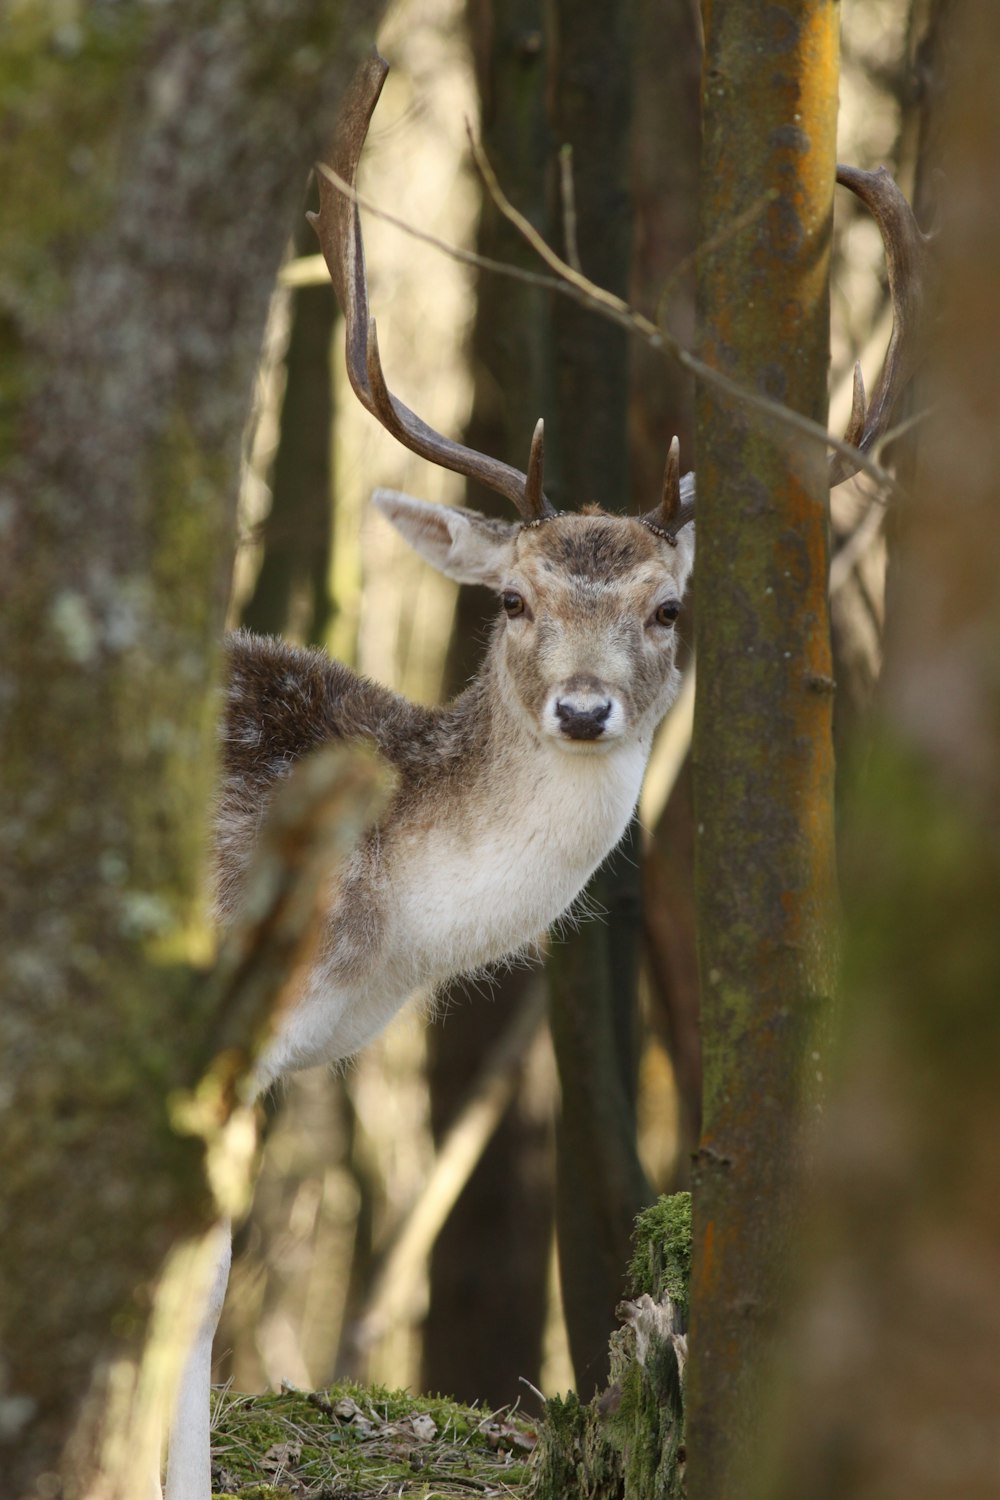 a deer standing next to a tree in a forest